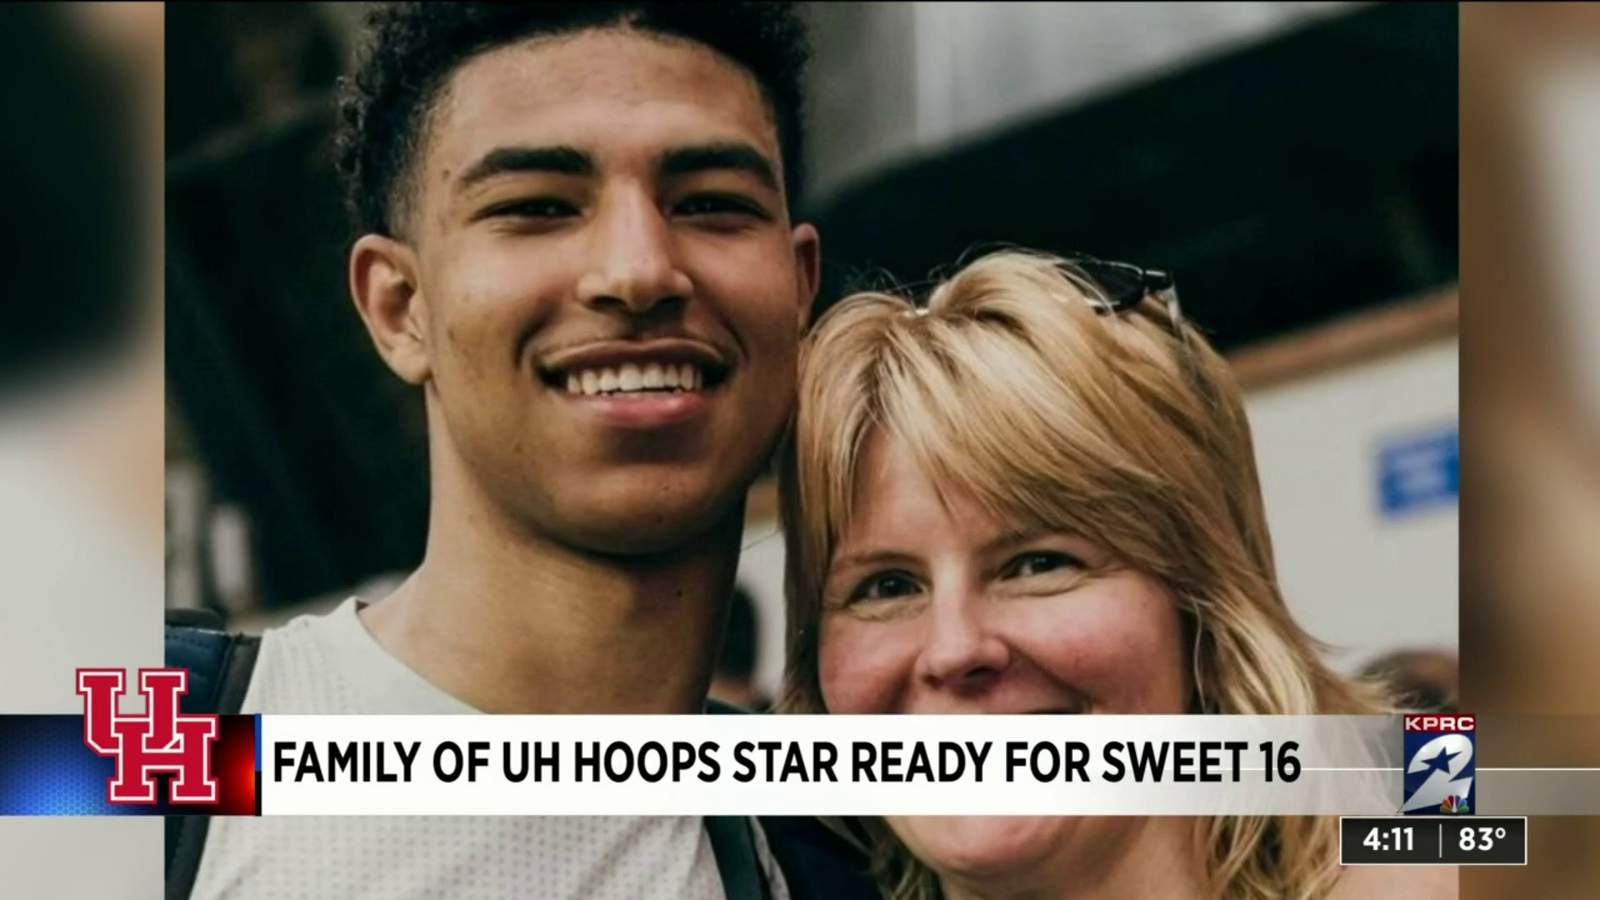 Family of UH basketball star Quentin Grimes ready for Sweet 16